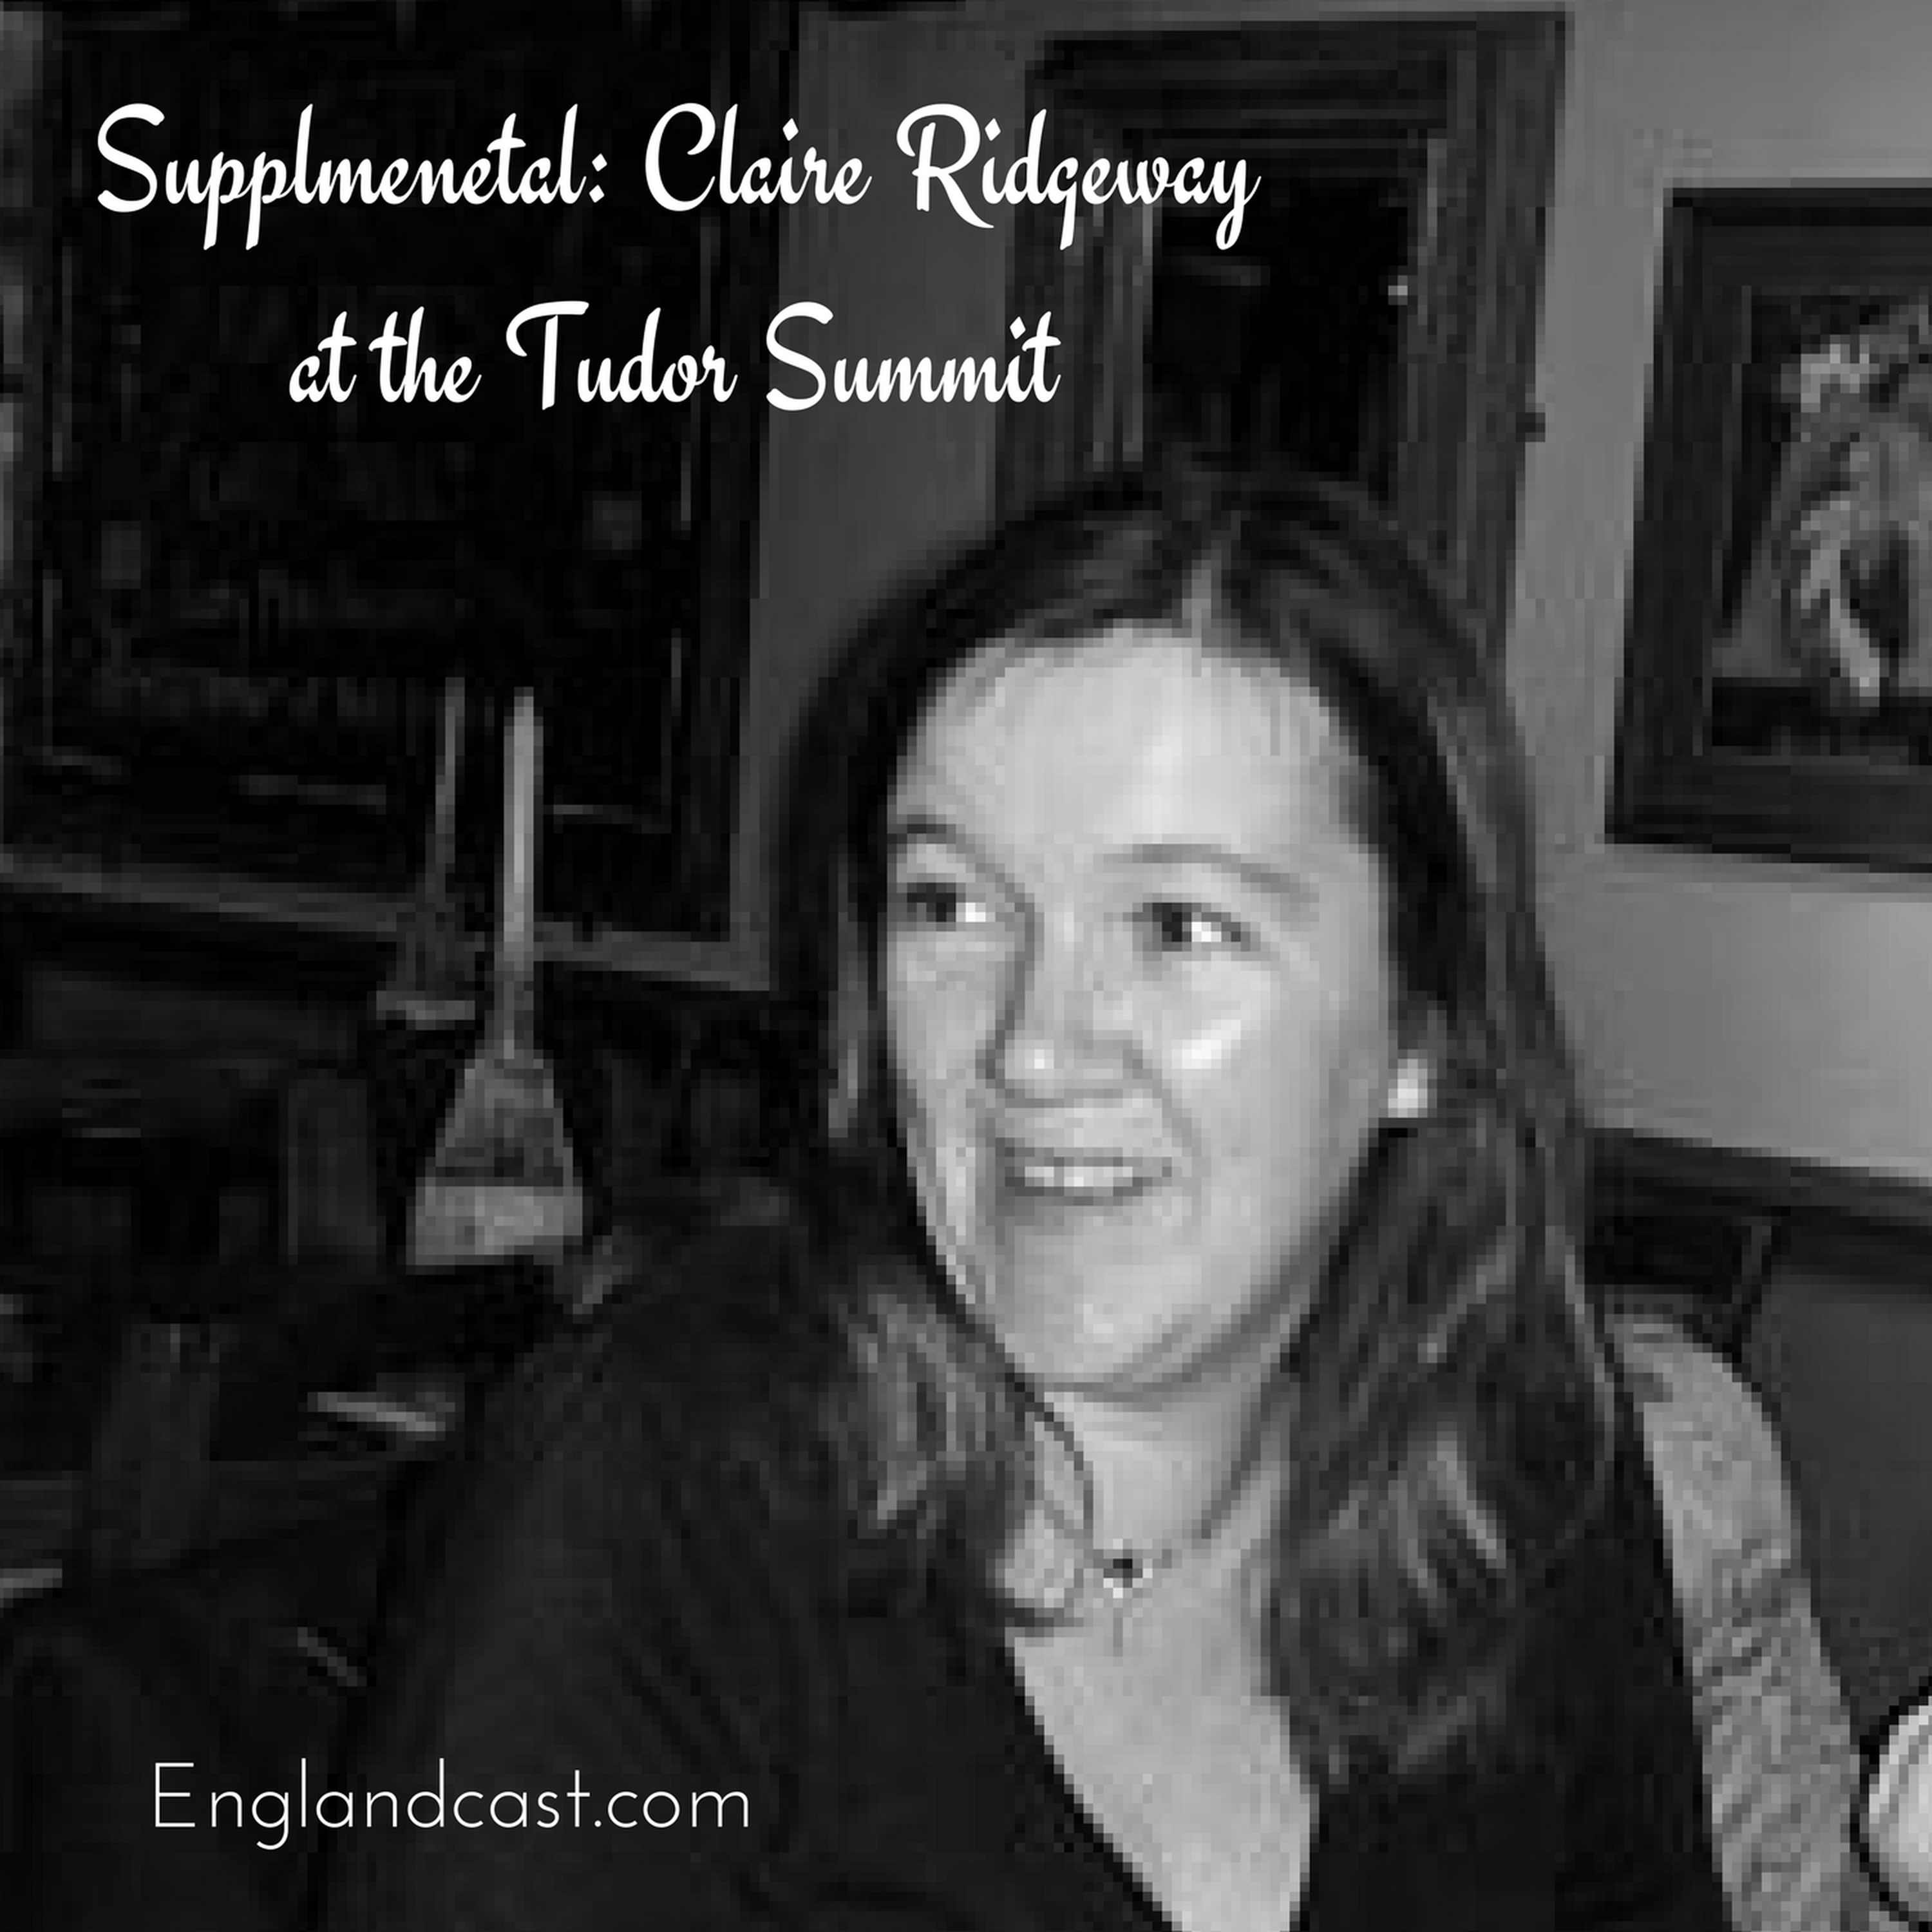 Supplemental: Claire Ridgway at the Tudor Summit